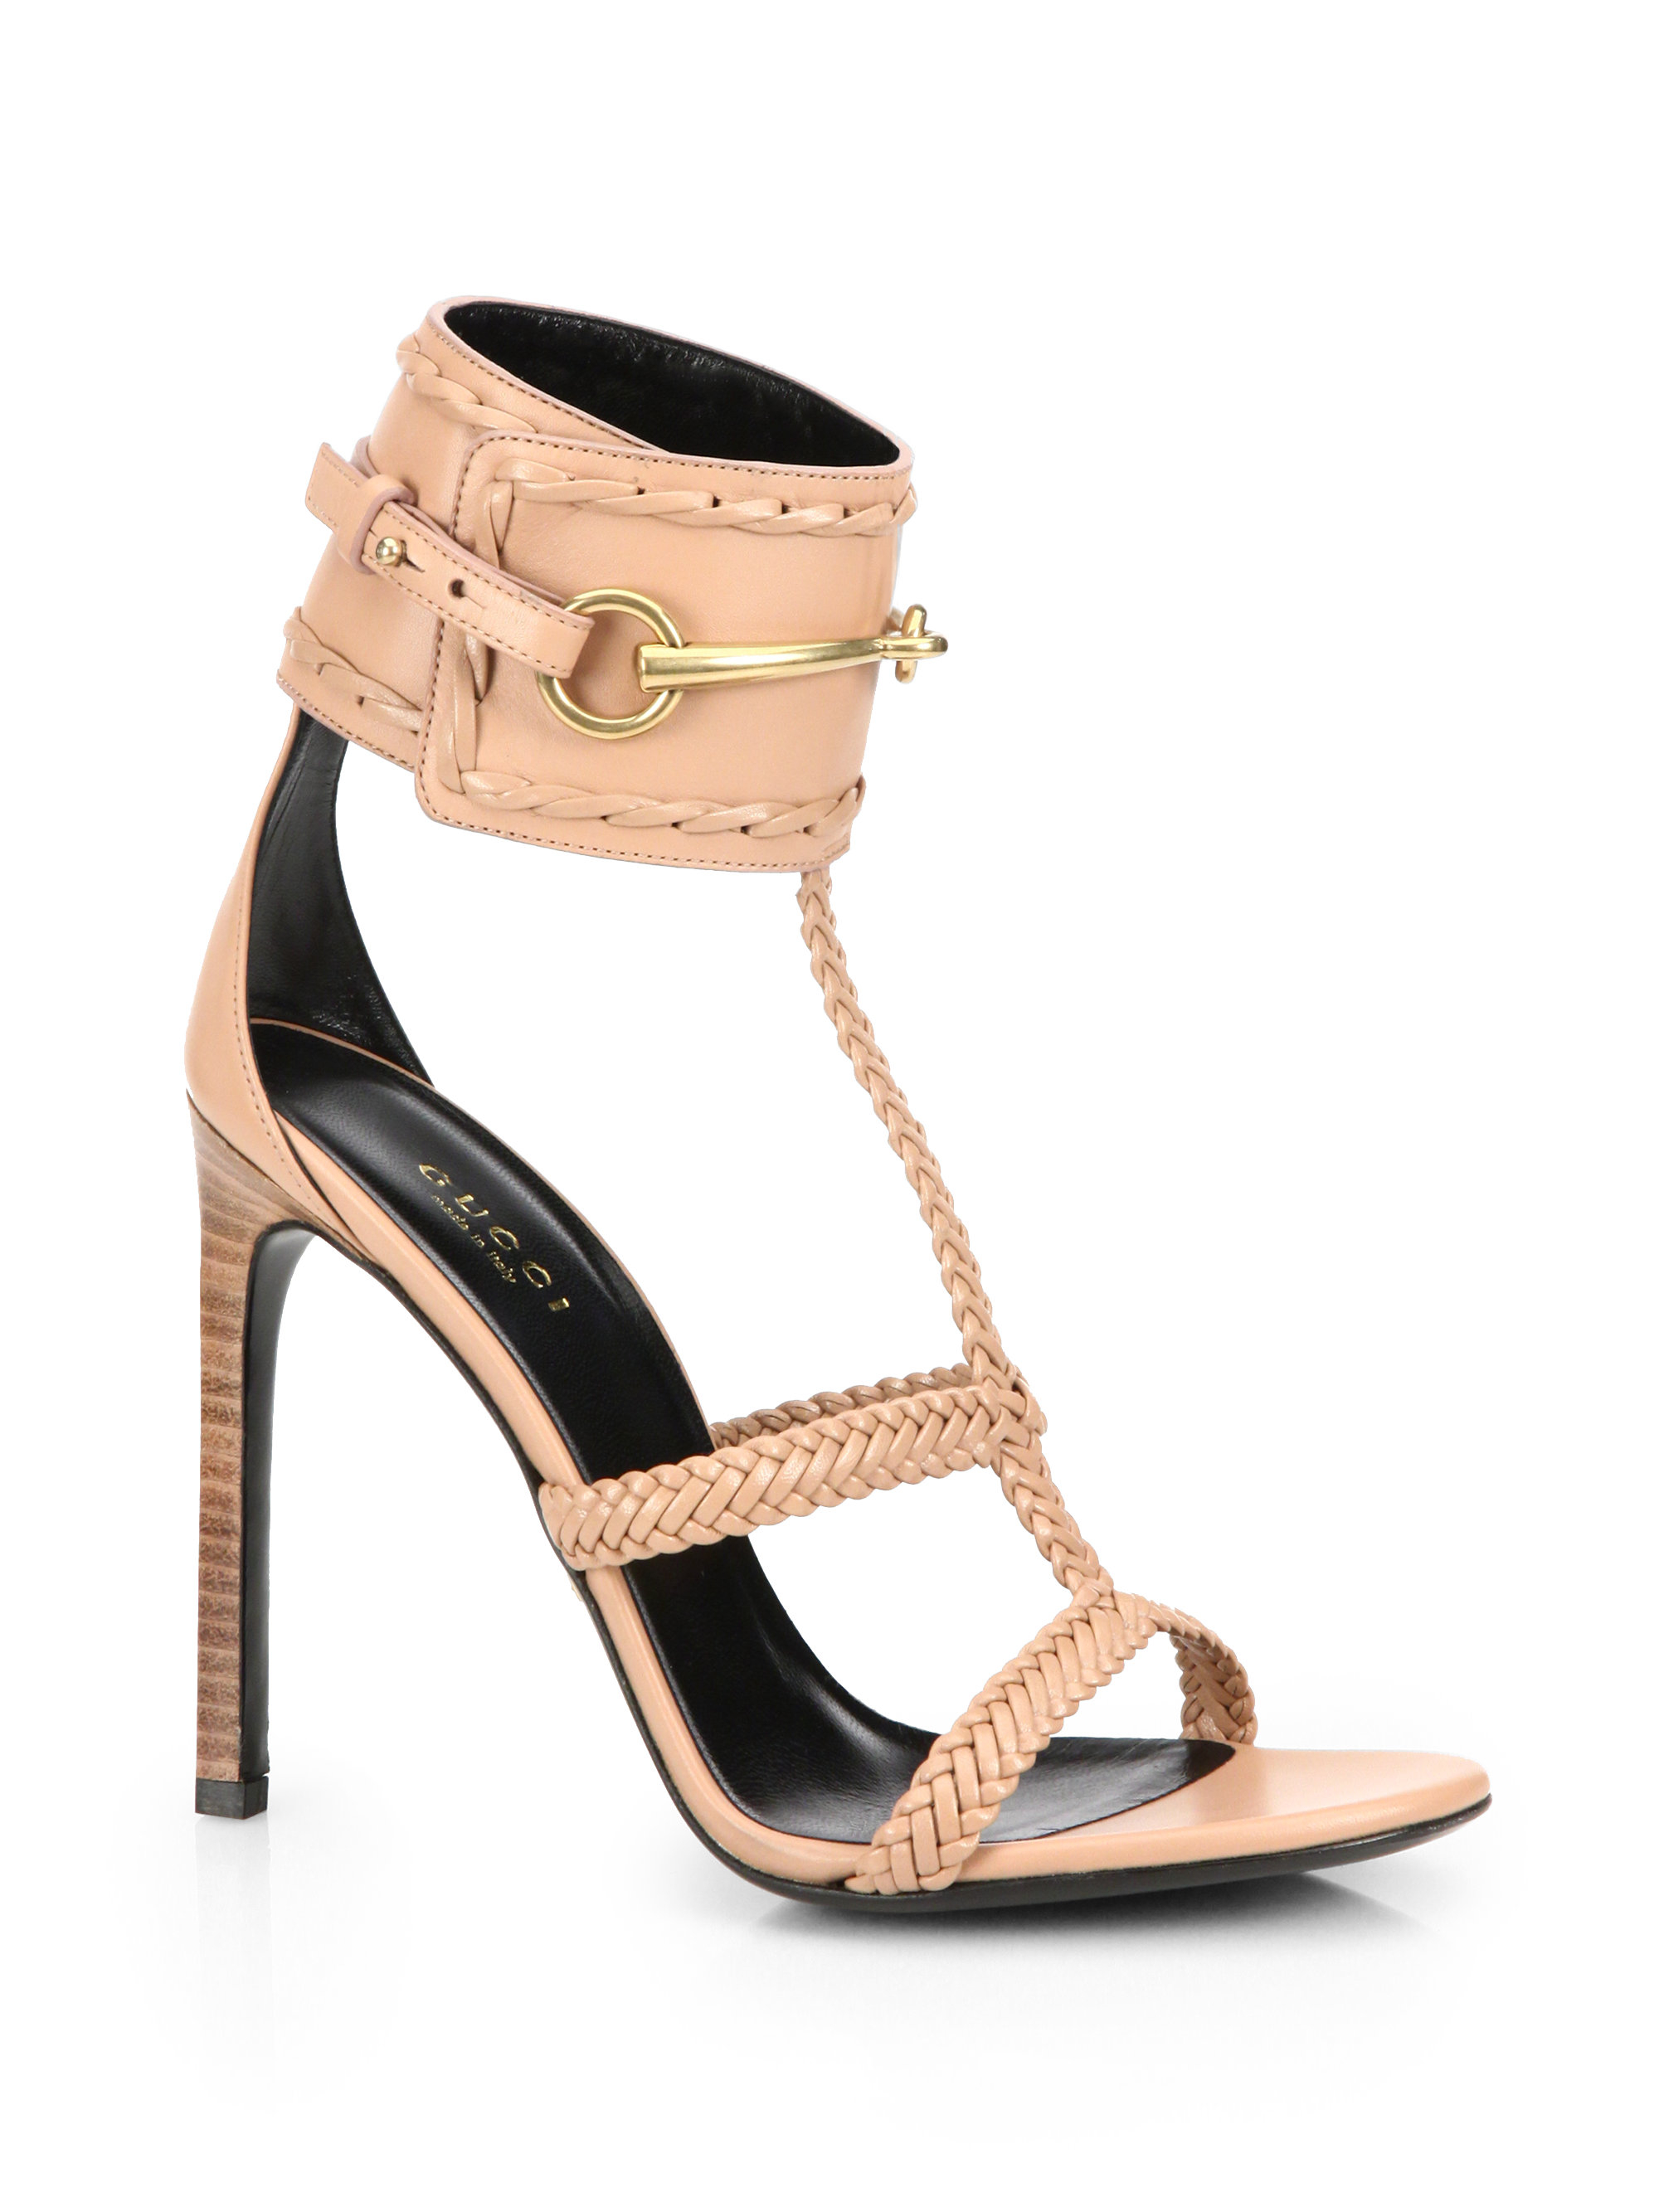 saks gucci womens shoes